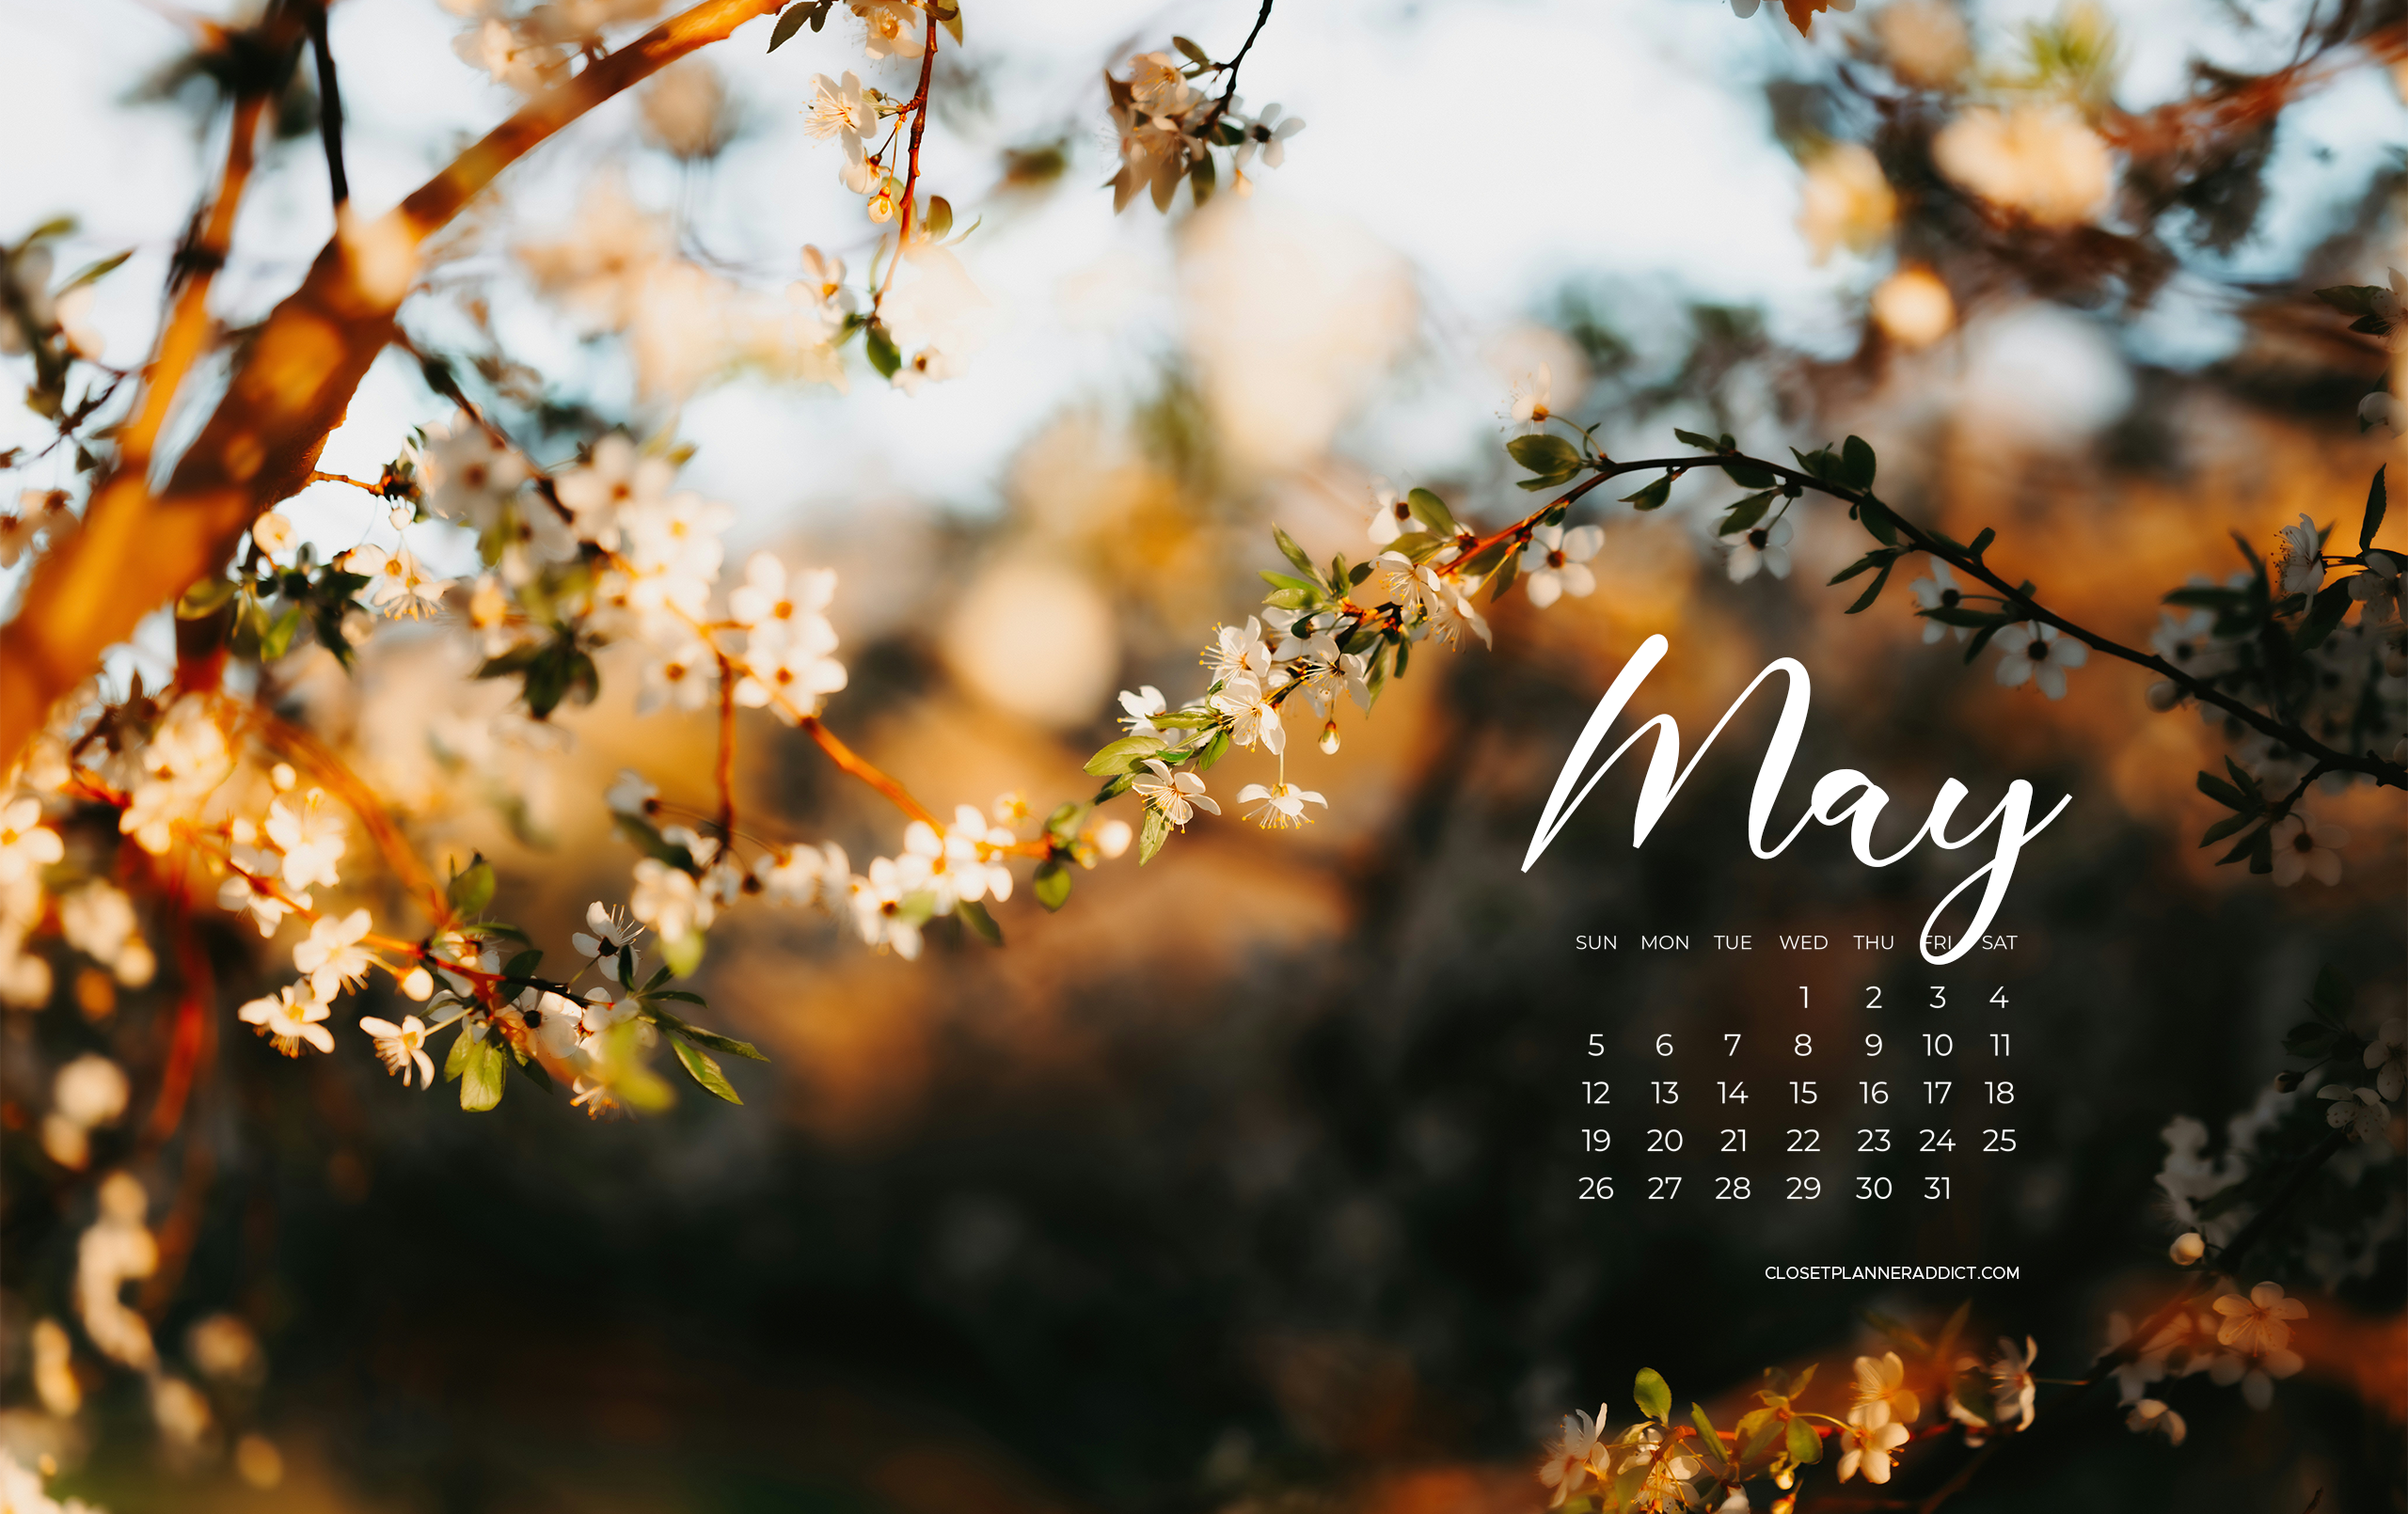 Free Download May 2024 Wallpapers by Closet Planner Addict